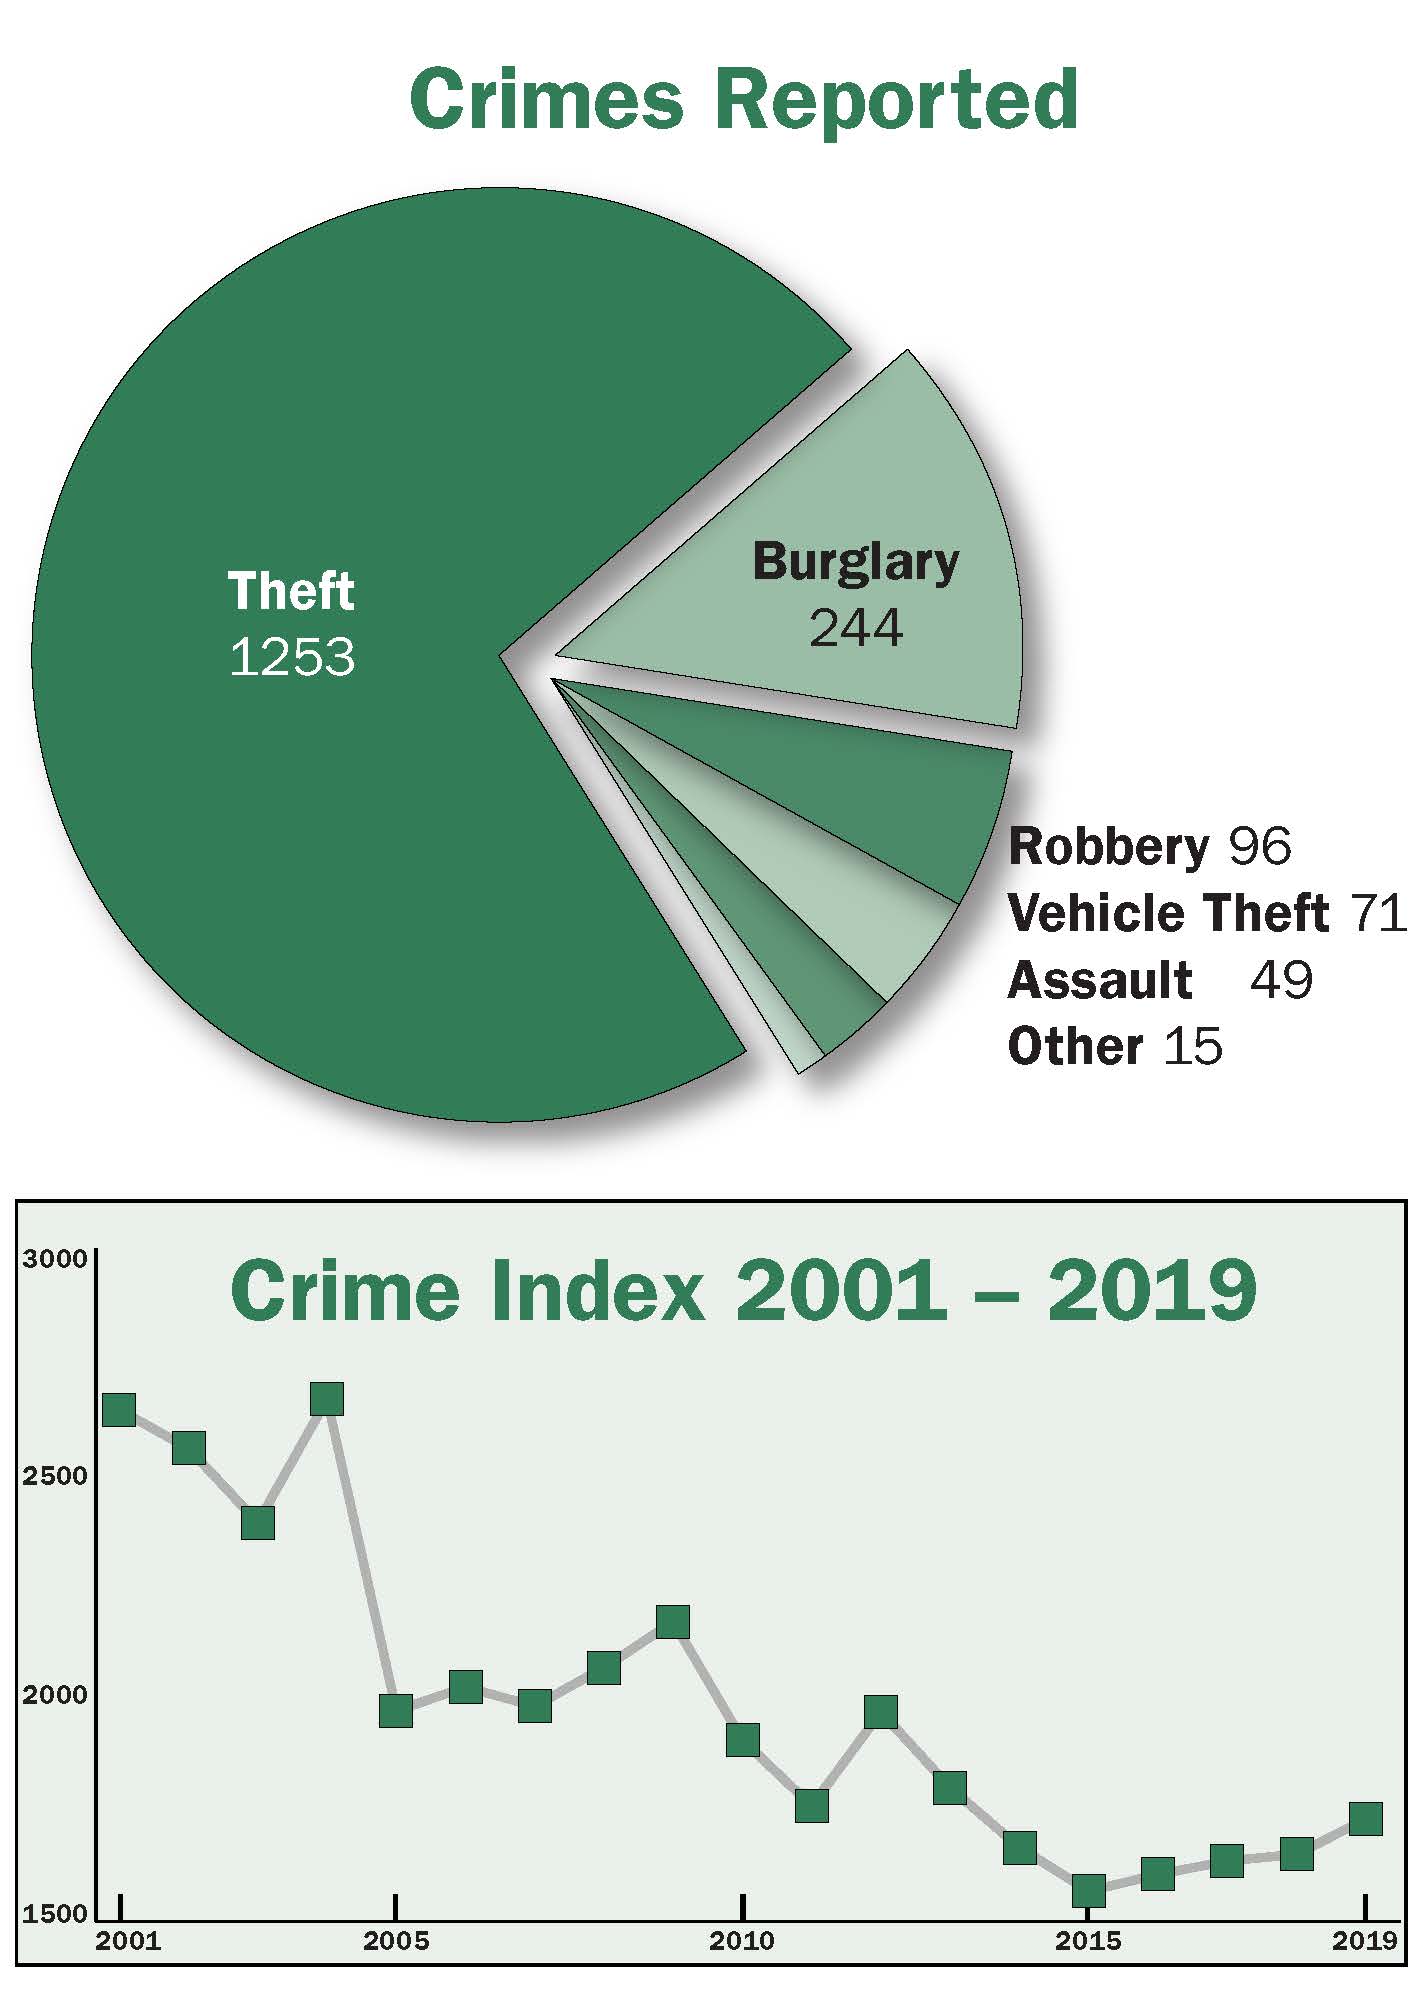 Chart and graph of crimes reported in Oak Park in 2019